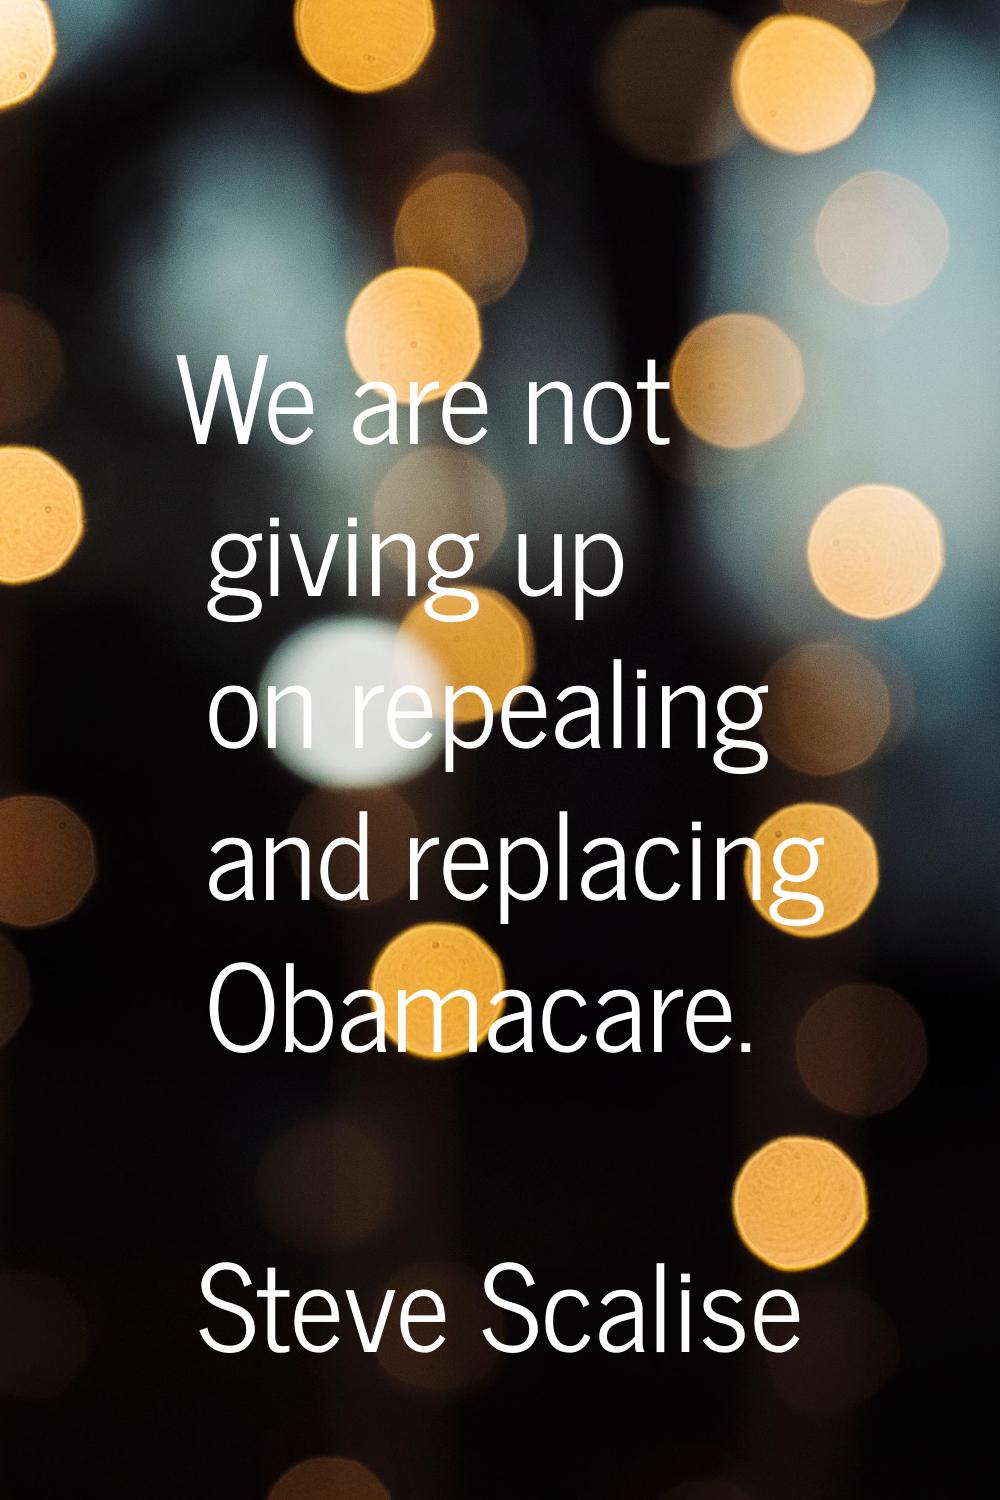 We are not giving up on repealing and replacing Obamacare.